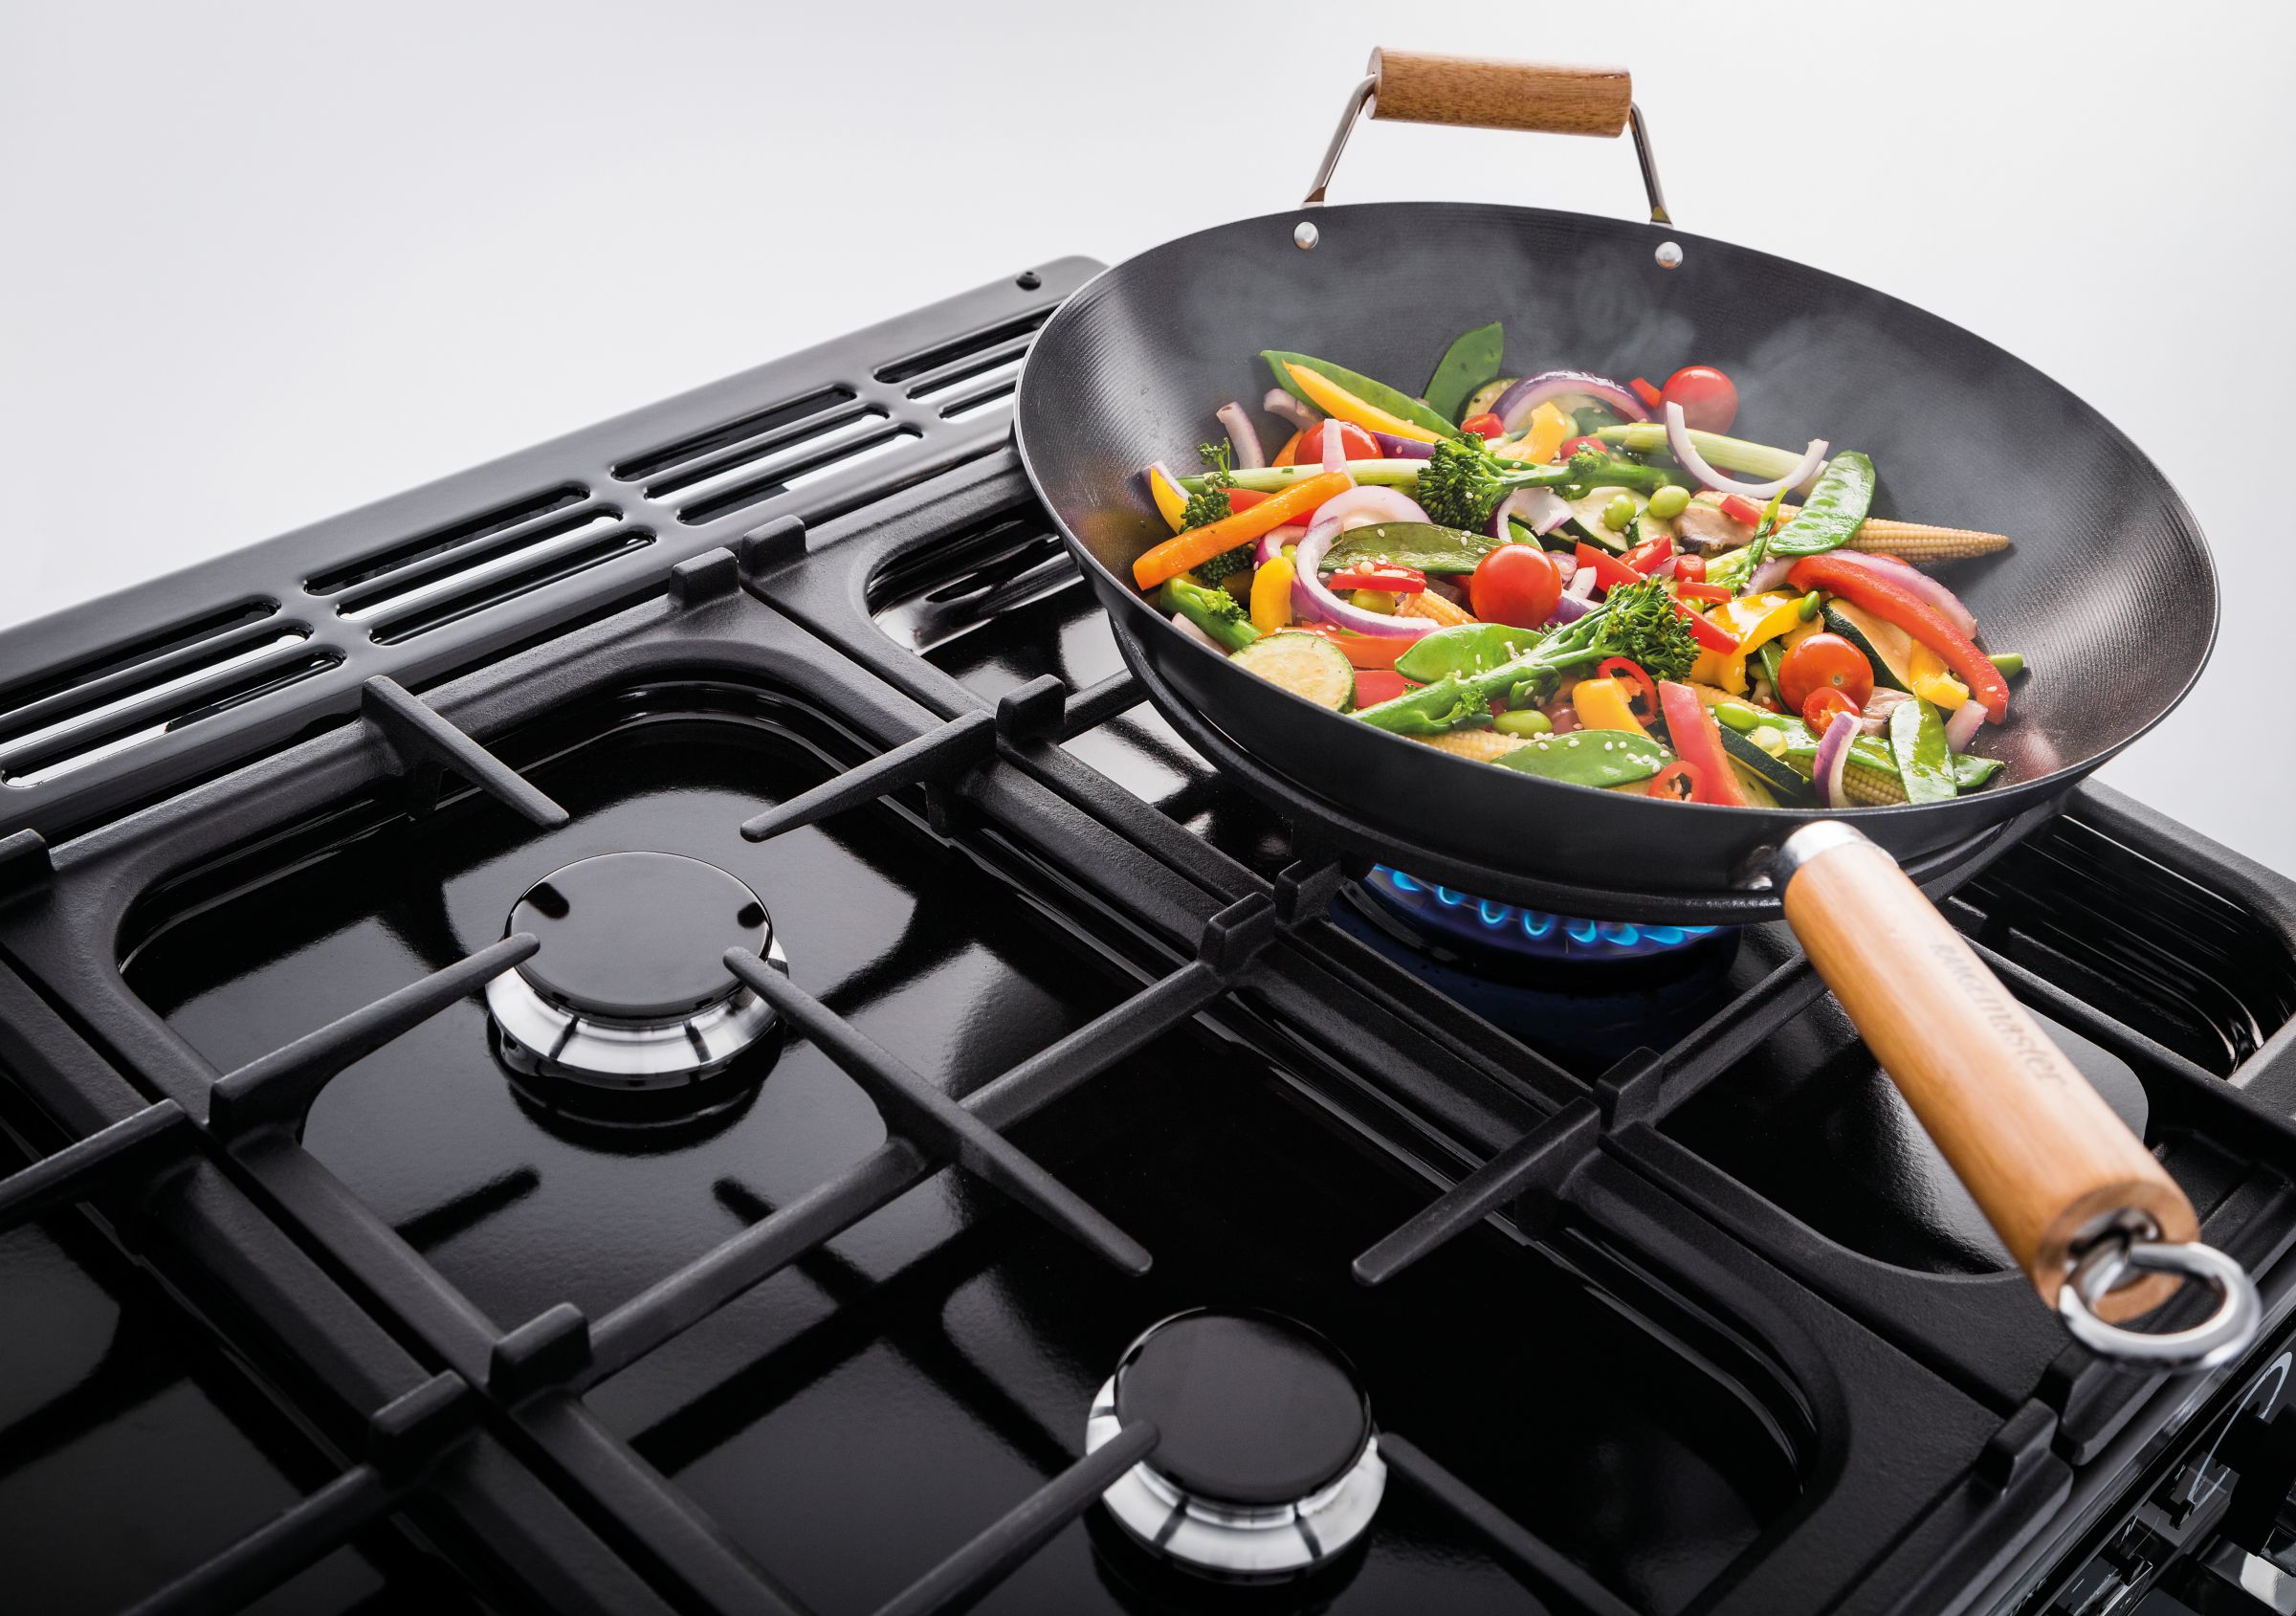 rangemaster cooker with a wok on the top